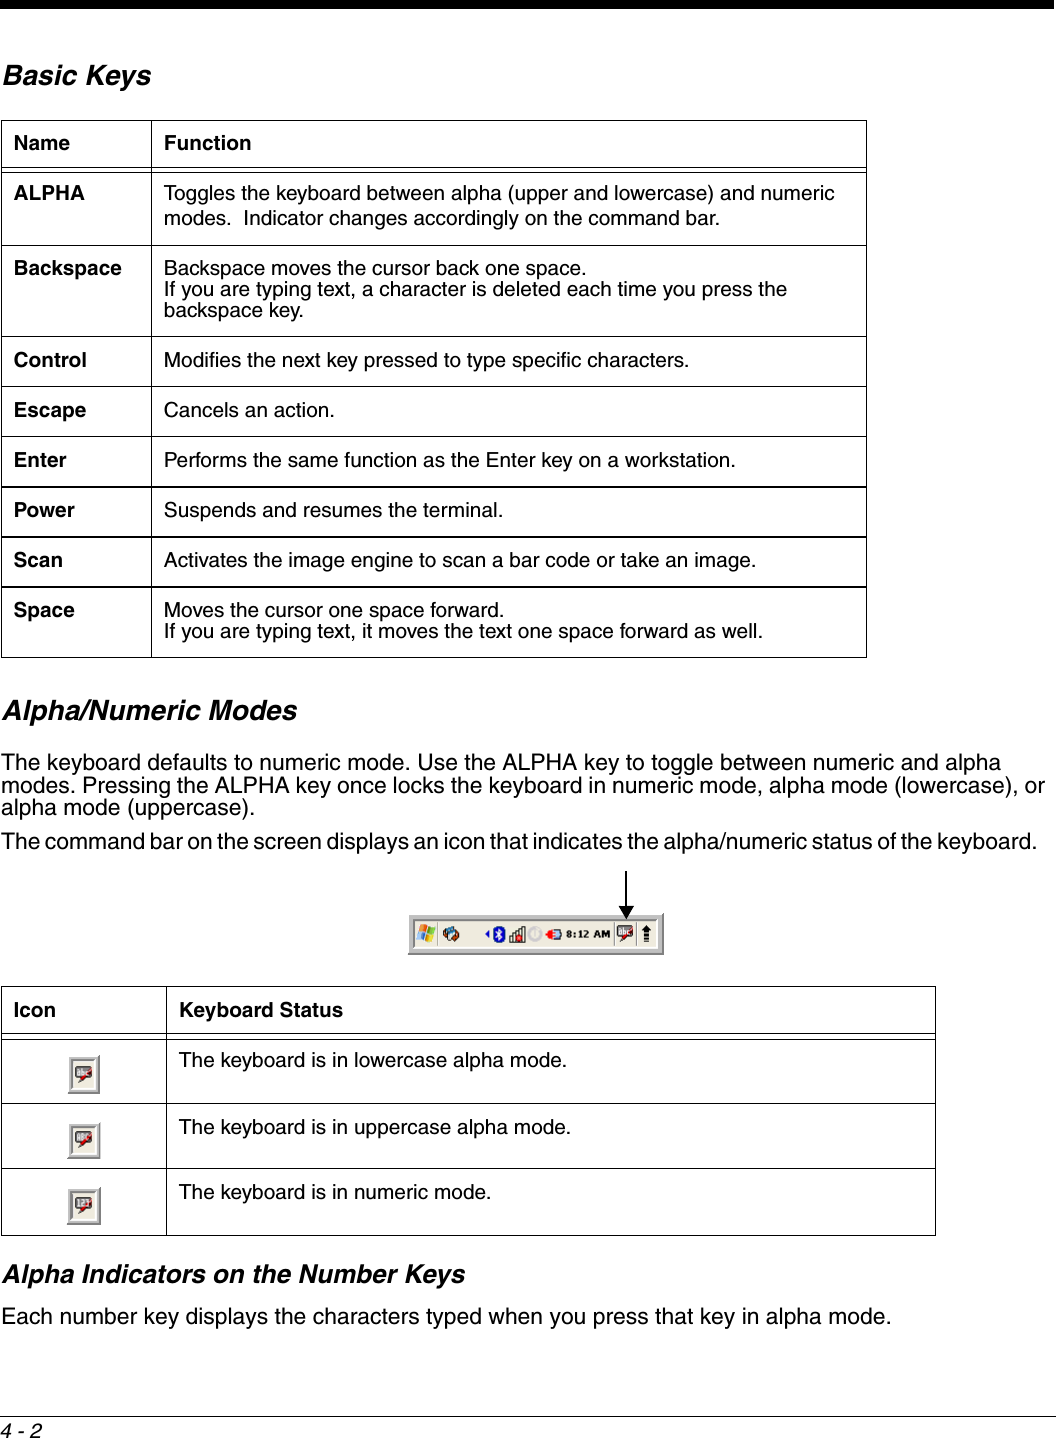 4 - 2Basic KeysAlpha/Numeric ModesThe keyboard defaults to numeric mode. Use the ALPHA key to toggle between numeric and alpha modes. Pressing the ALPHA key once locks the keyboard in numeric mode, alpha mode (lowercase), or alpha mode (uppercase).The command bar on the screen displays an icon that indicates the alpha/numeric status of the keyboard.   Alpha Indicators on the Number KeysEach number key displays the characters typed when you press that key in alpha mode. Name FunctionALPHA Toggles the keyboard between alpha (upper and lowercase) and numeric modes.  Indicator changes accordingly on the command bar.Backspace Backspace moves the cursor back one space. If you are typing text, a character is deleted each time you press the backspace key.Control Modifies the next key pressed to type specific characters.Escape Cancels an action.Enter Performs the same function as the Enter key on a workstation.Power Suspends and resumes the terminal.Scan Activates the image engine to scan a bar code or take an image.Space Moves the cursor one space forward.If you are typing text, it moves the text one space forward as well. Icon Keyboard StatusThe keyboard is in lowercase alpha mode.The keyboard is in uppercase alpha mode.The keyboard is in numeric mode.